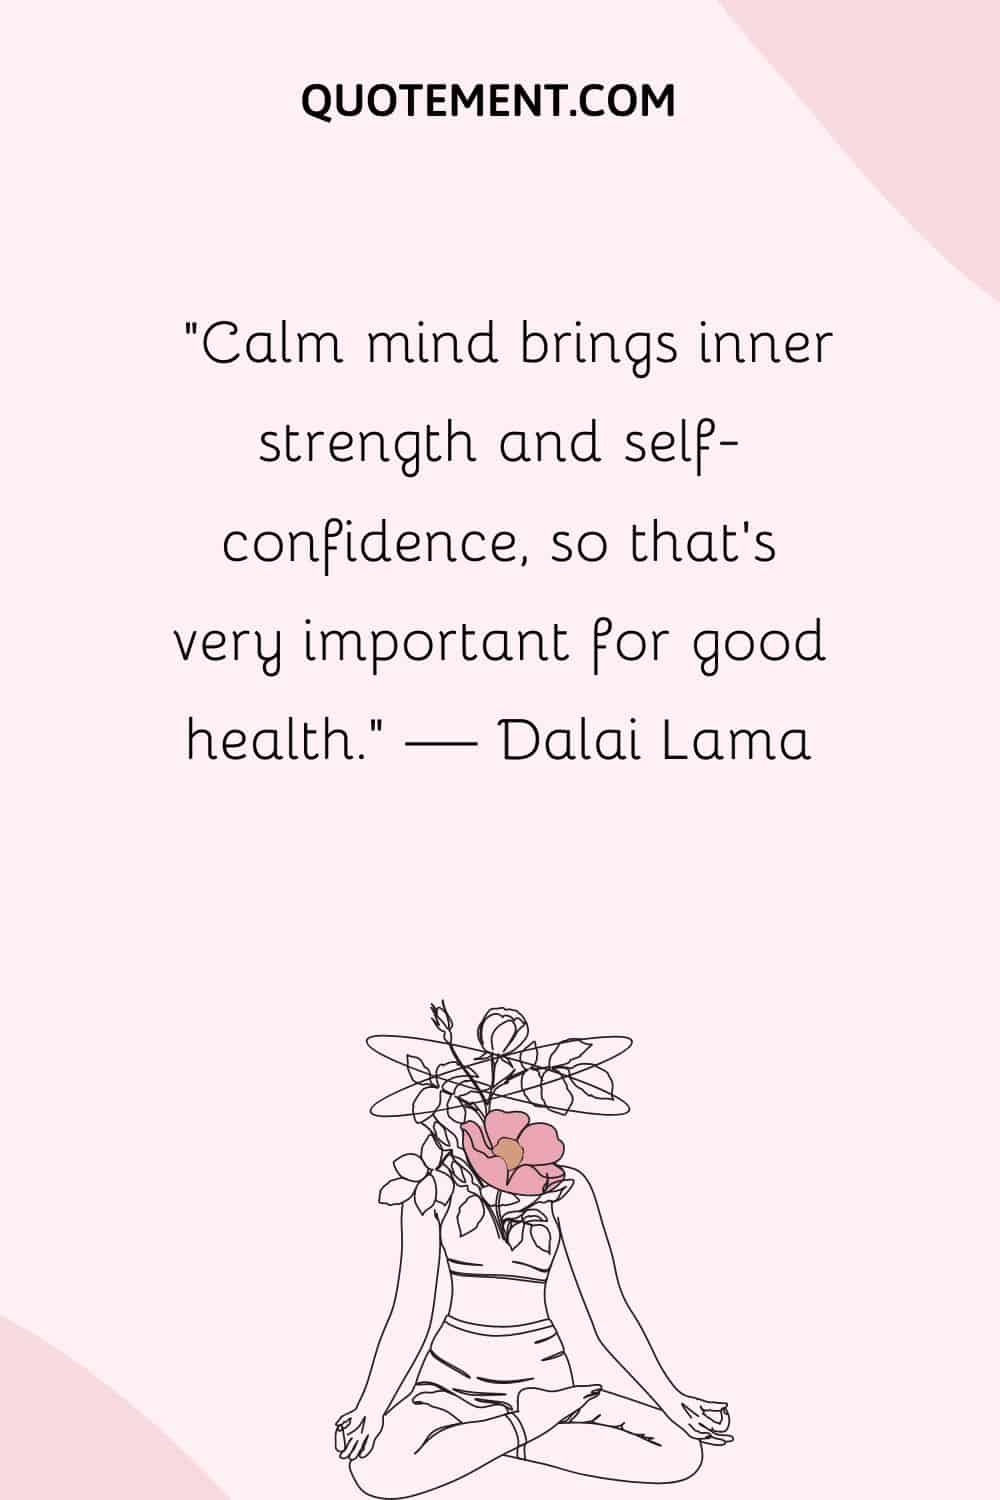 Calm mind brings inner strength and self-confidence, so that’s very important for good health